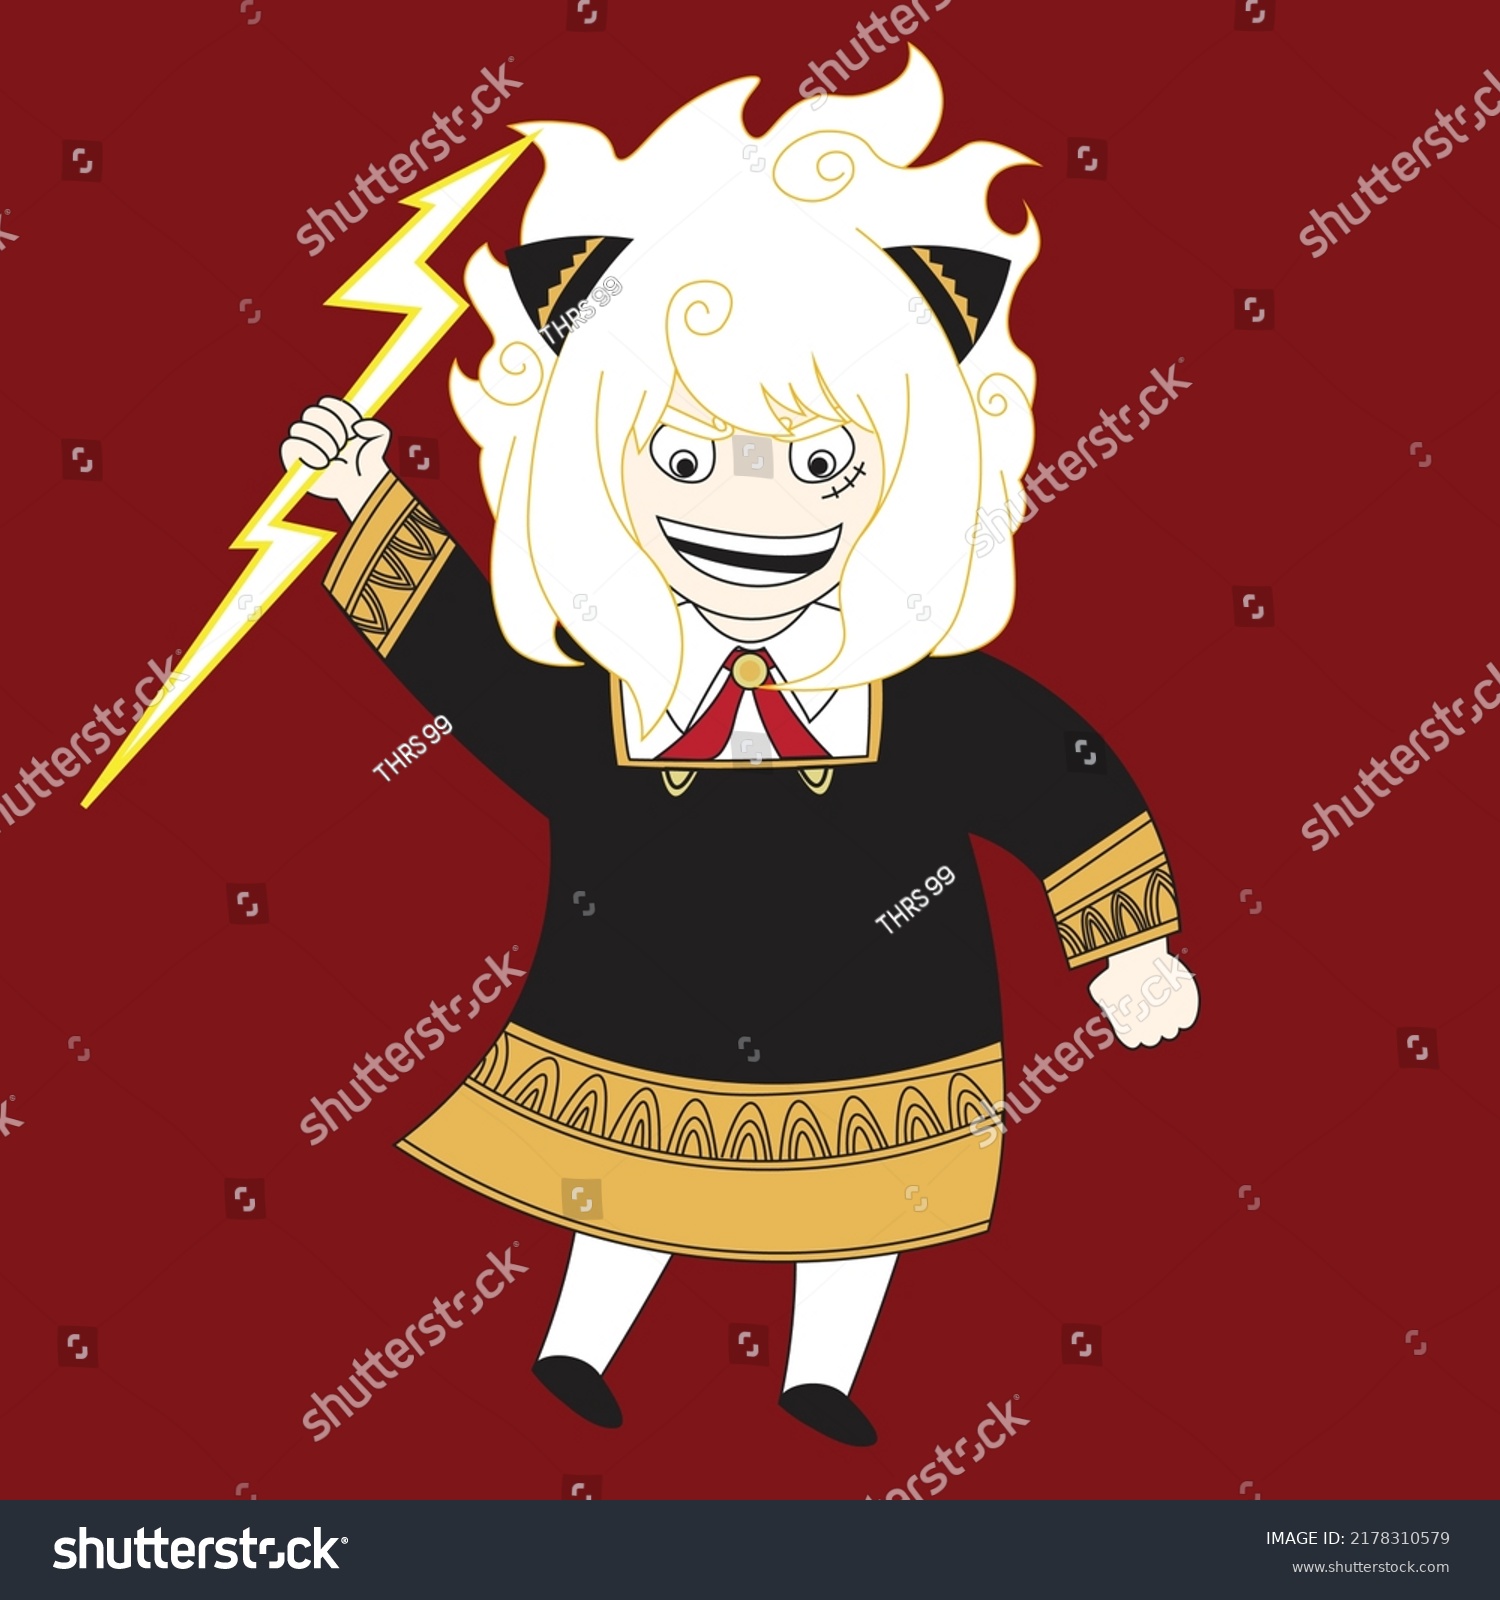 SVG of cute animation of angry anya svg